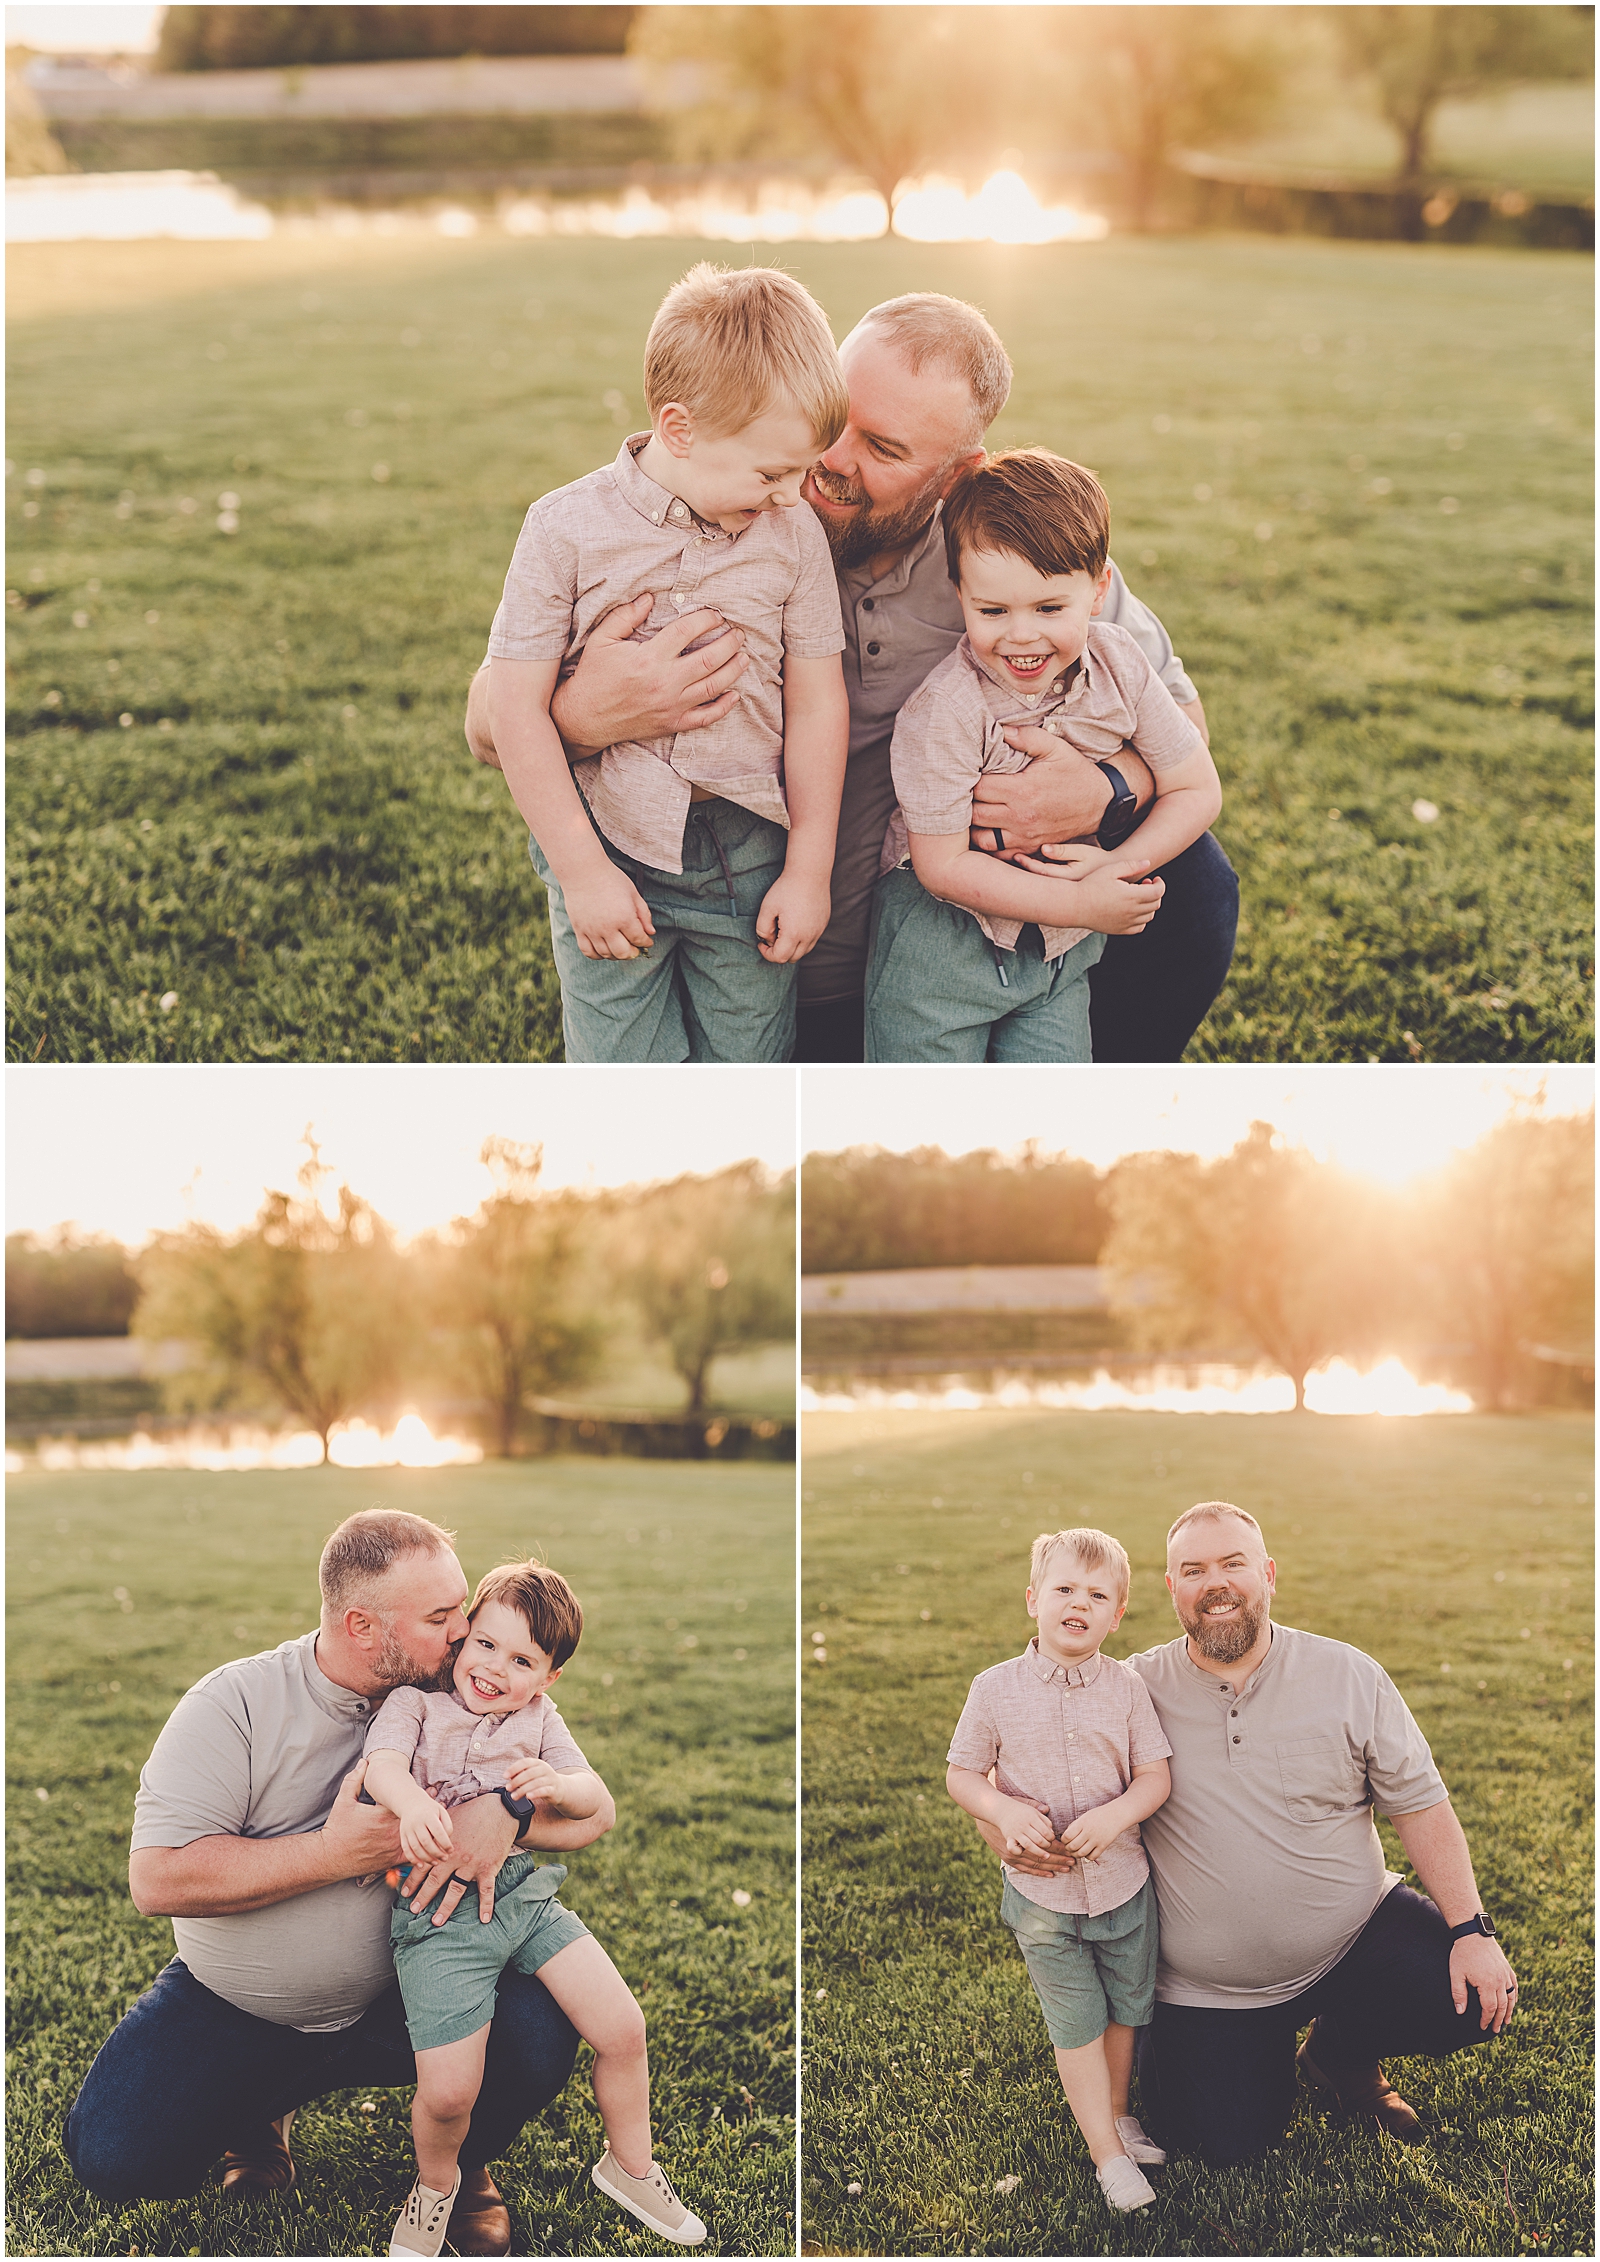 Spring family session in Central Illinois Mackinaw with Chicagoland family photographer Kara Evans Photographer.